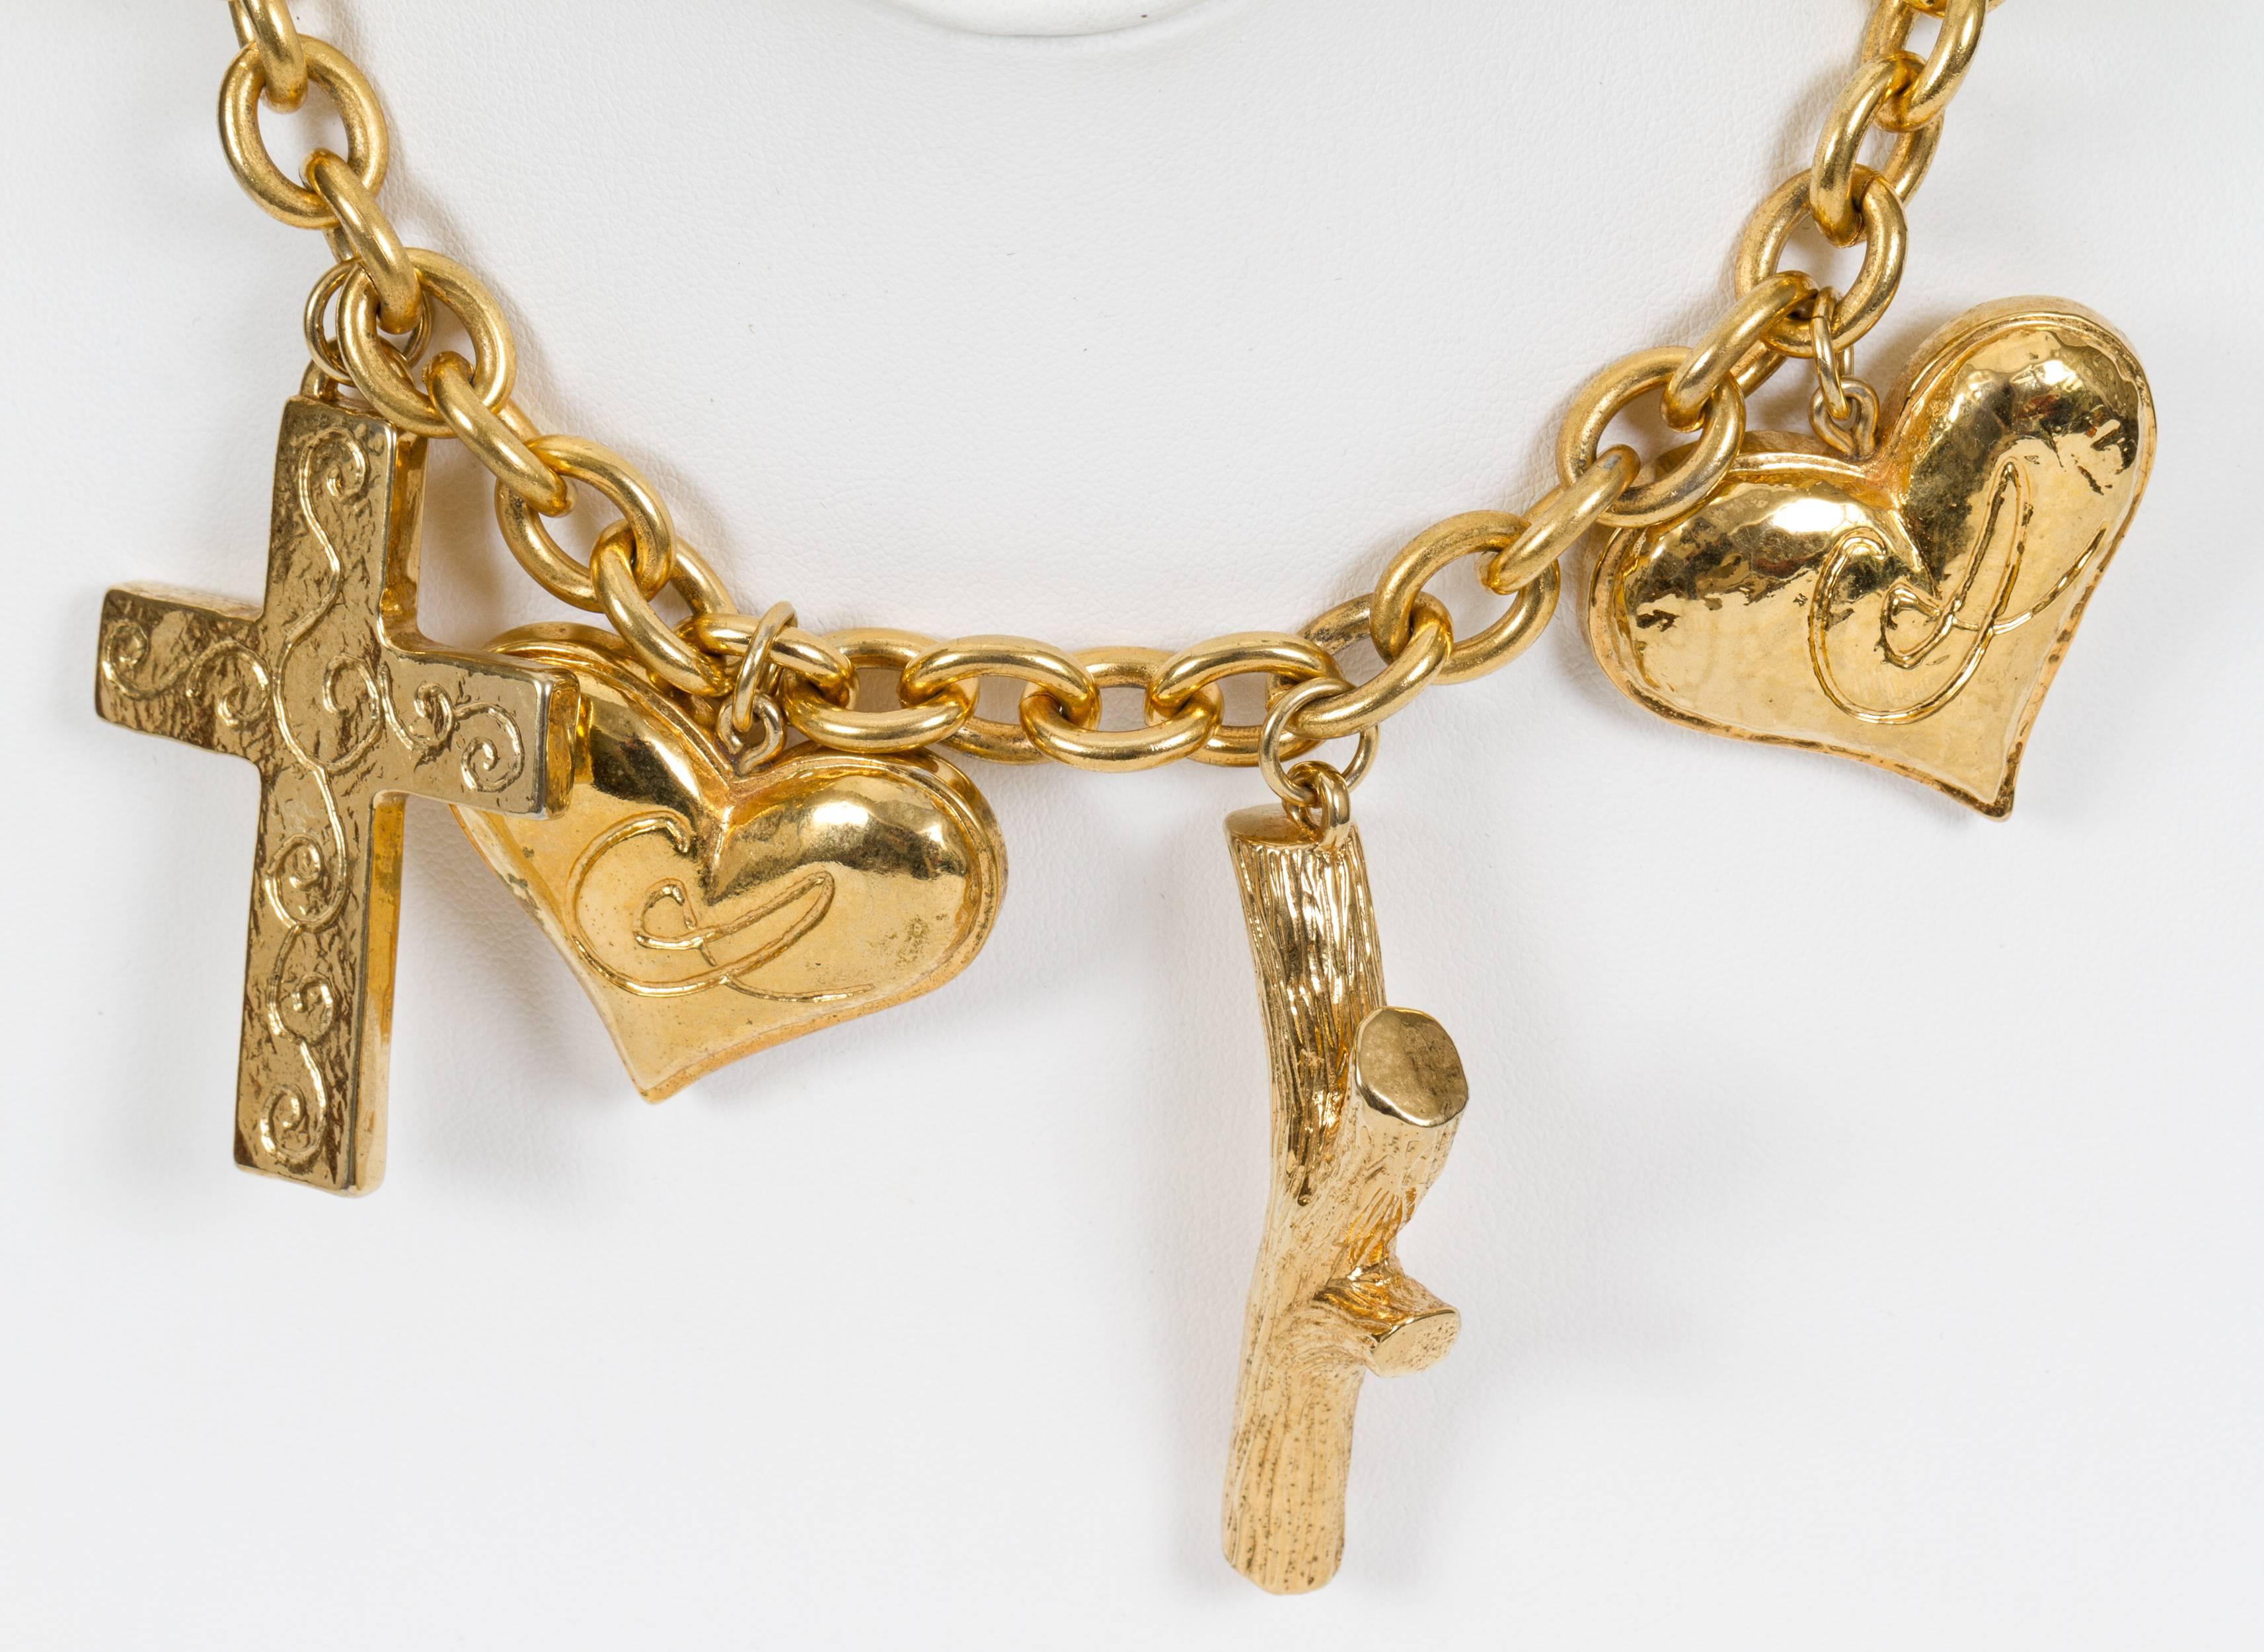 Christian Lacroix goldtone charm necklace. Great condition. Comes with velvet pouch.